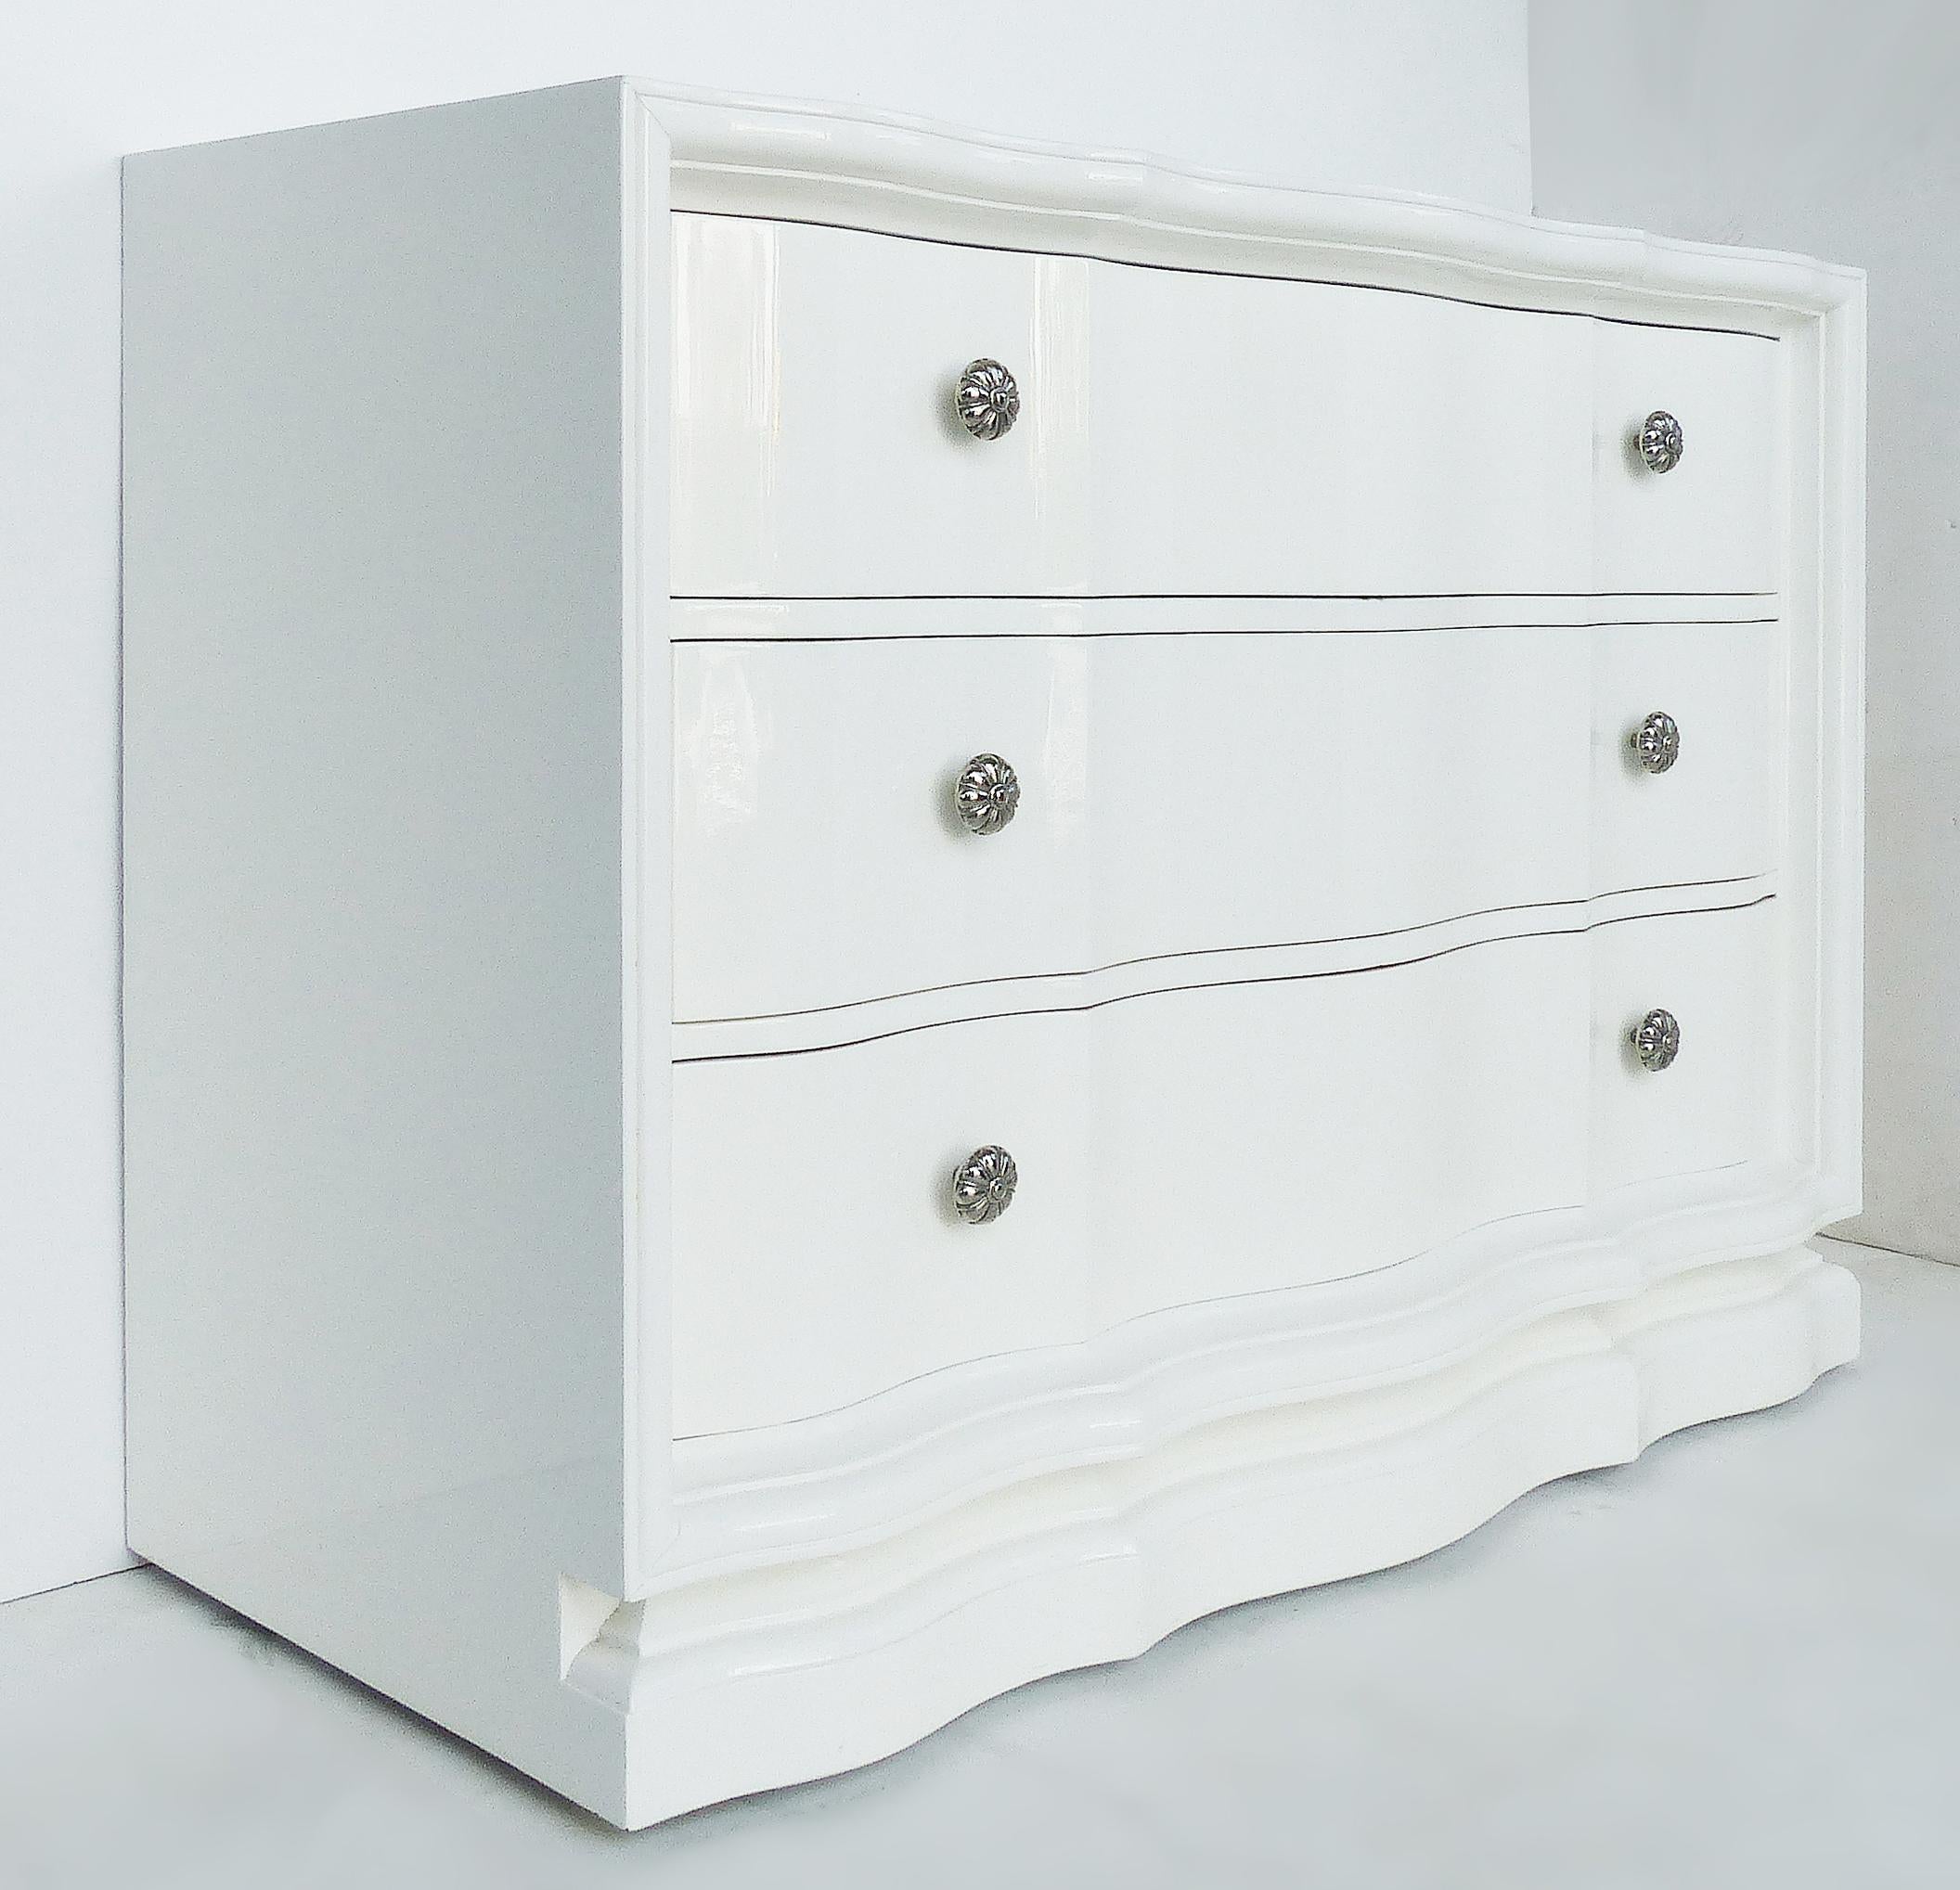 Vintage lacquered chest of drawers with scalloped, wavy drawers

Offered for sale is a pair of fine quality white lacquered chests of drawers with scalloped, wavy drawer fronts. The chests have been recently lacquered including the interiors of